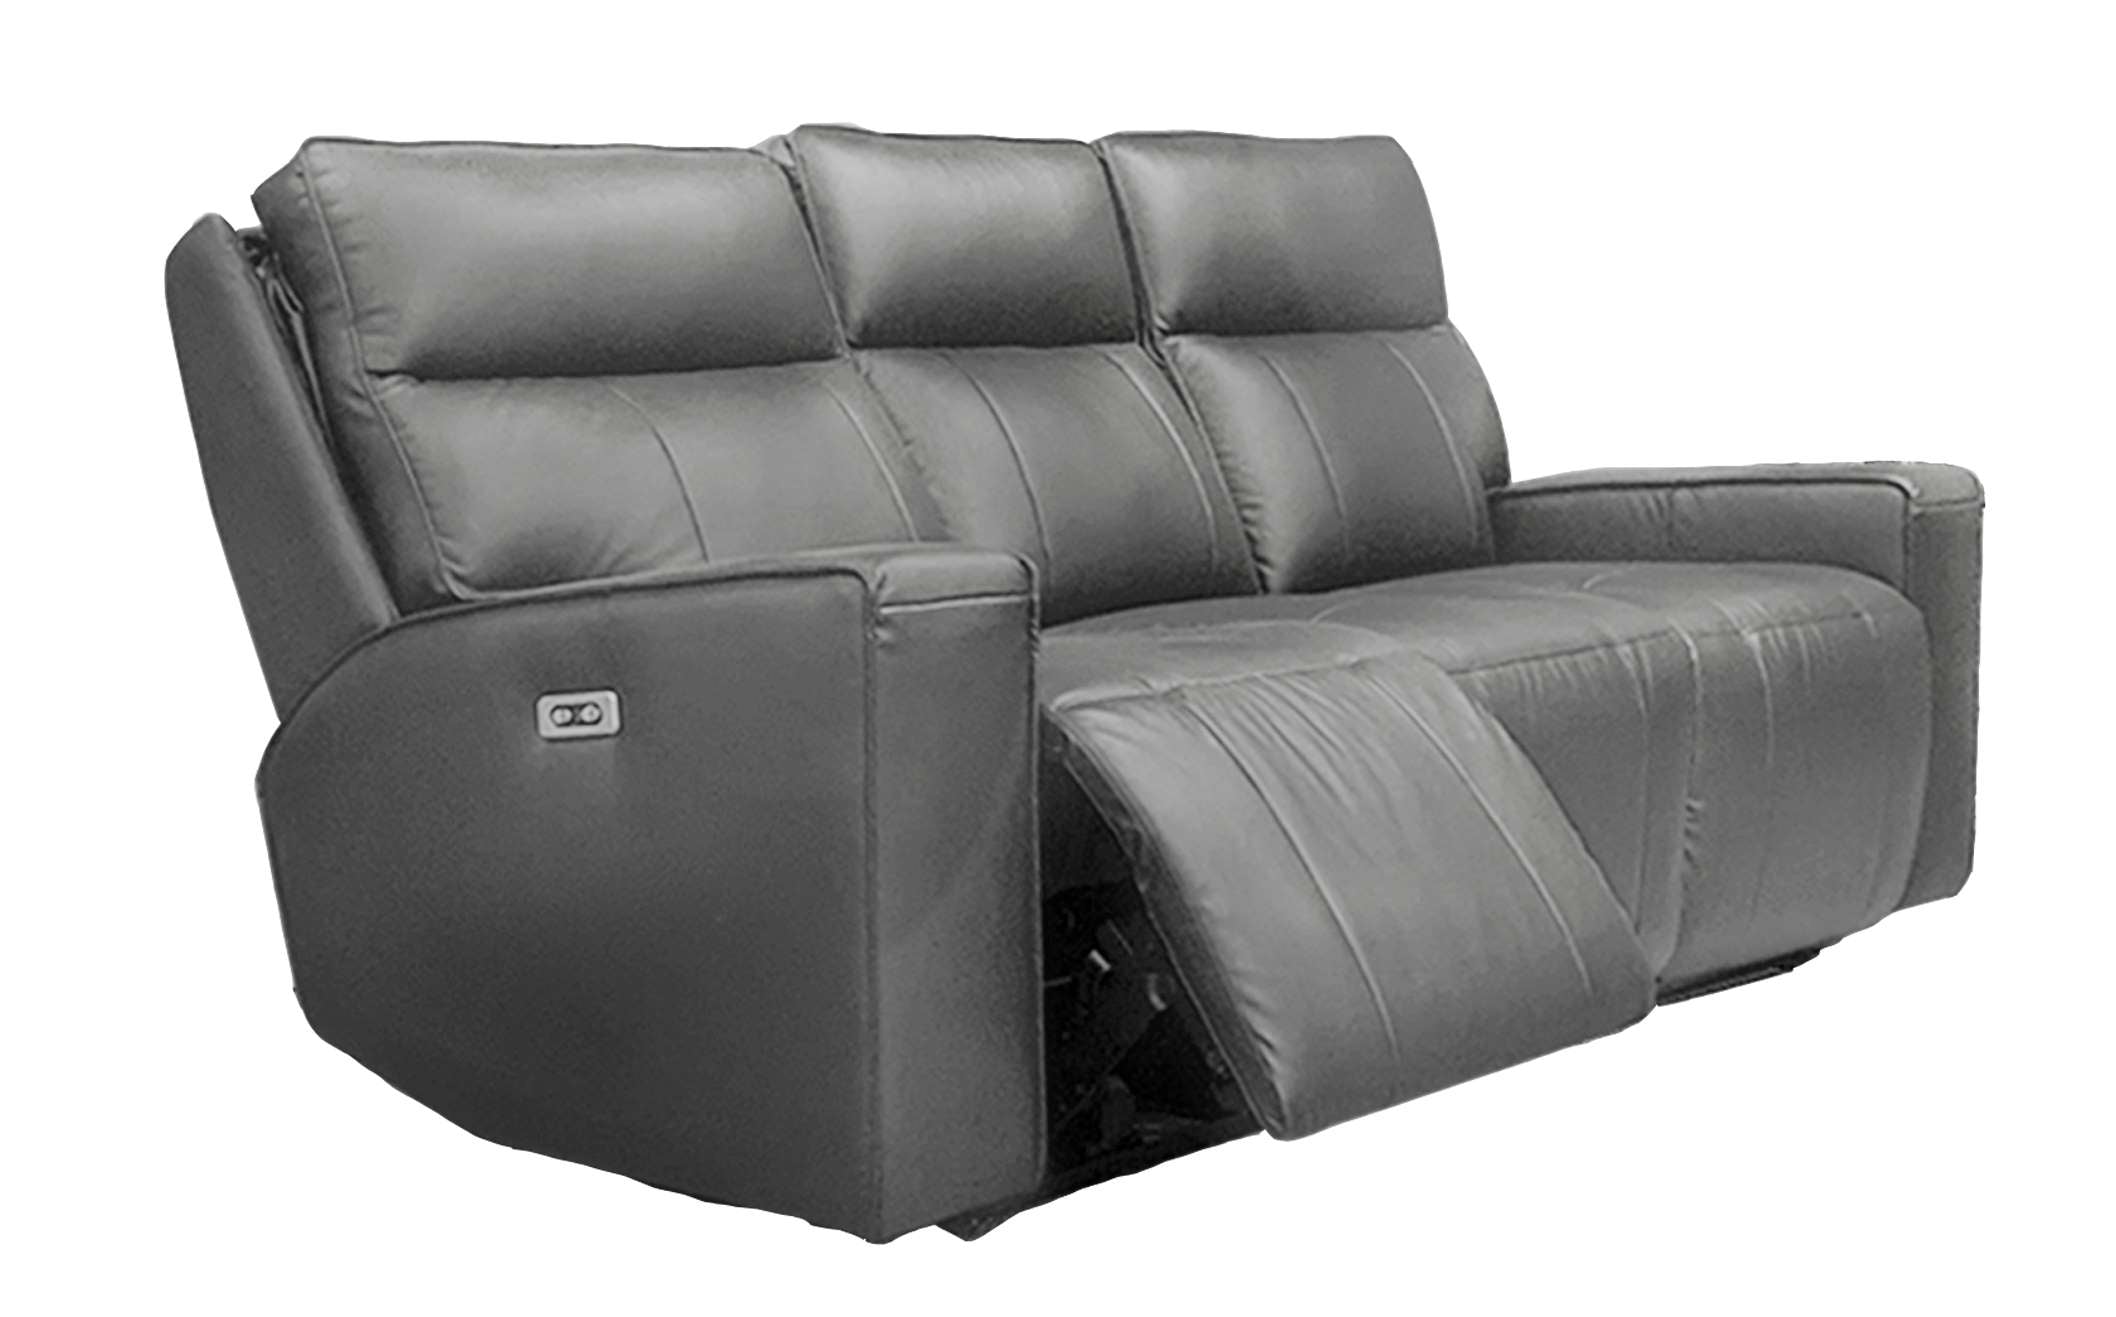 Chadwick Top Grain Leather Power Reclining Sofa Collection Grey 99943